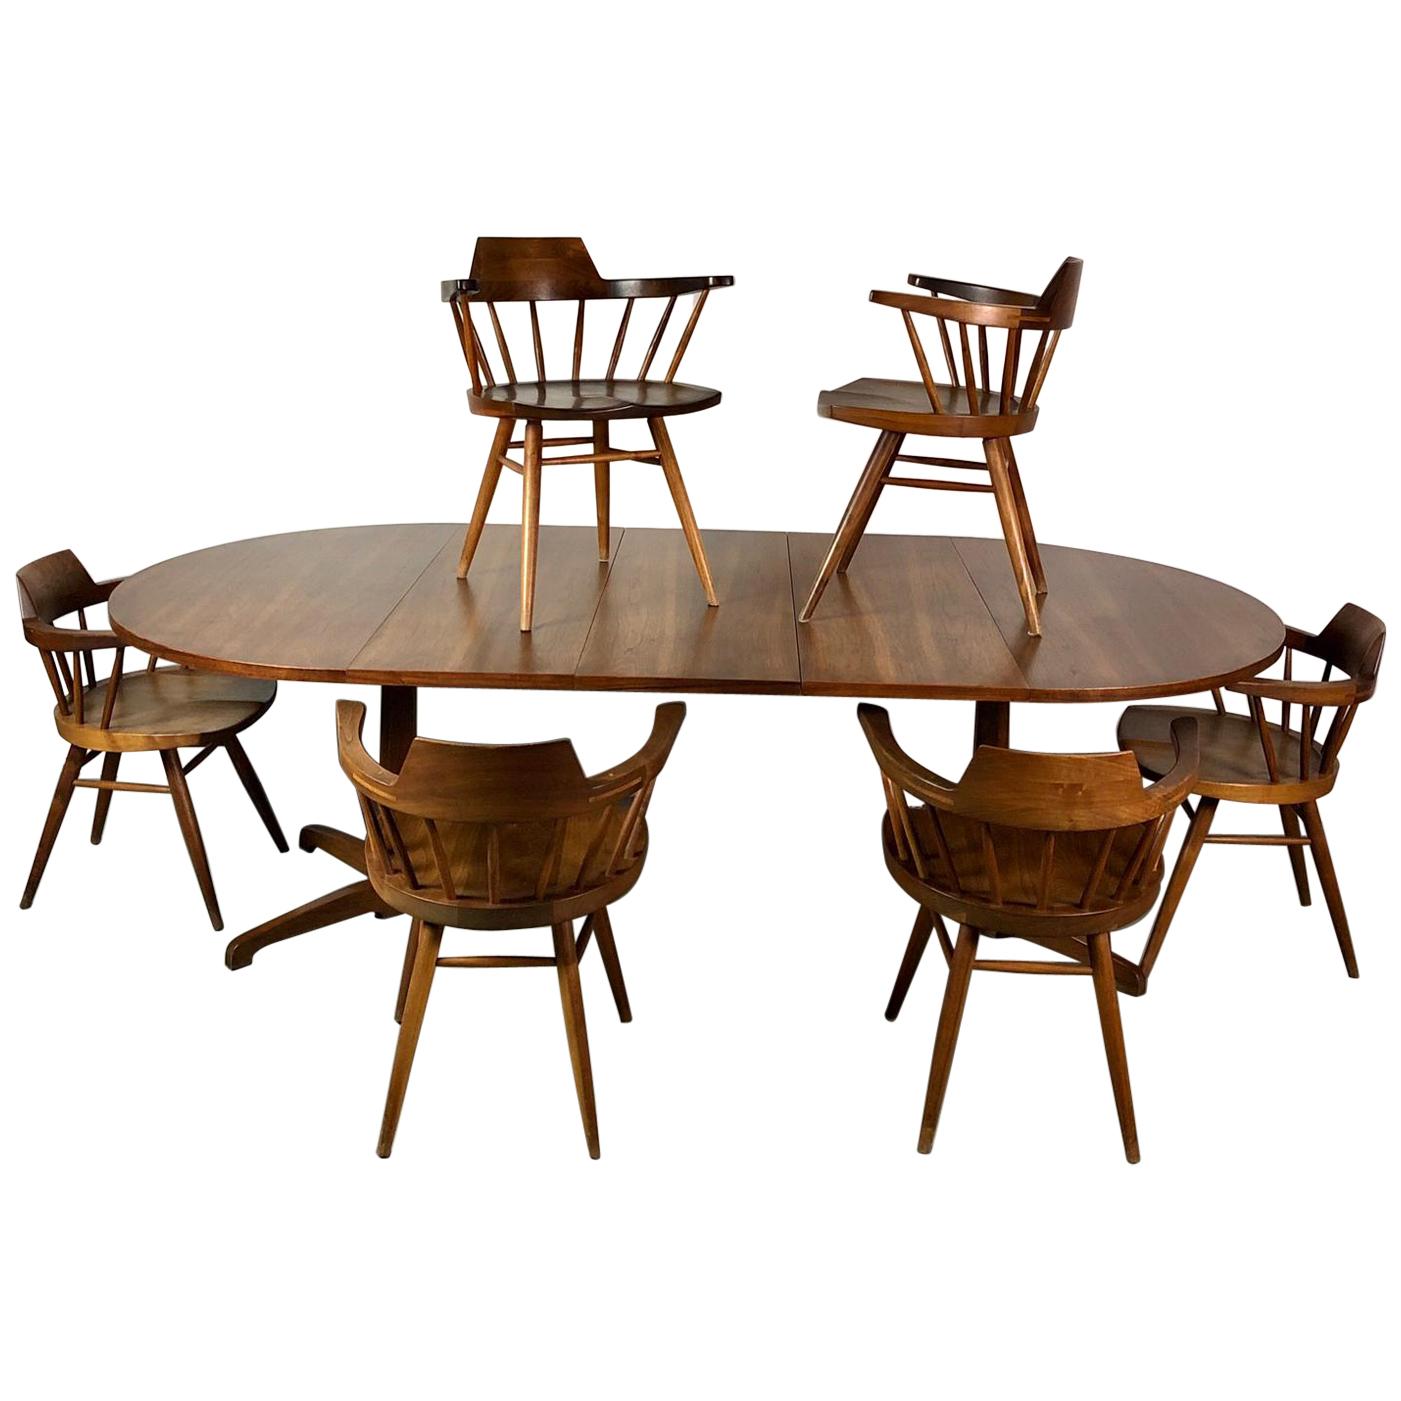 Early One of a Kind George Nakashima Dining Set with Six Captain Chairs USA 1966